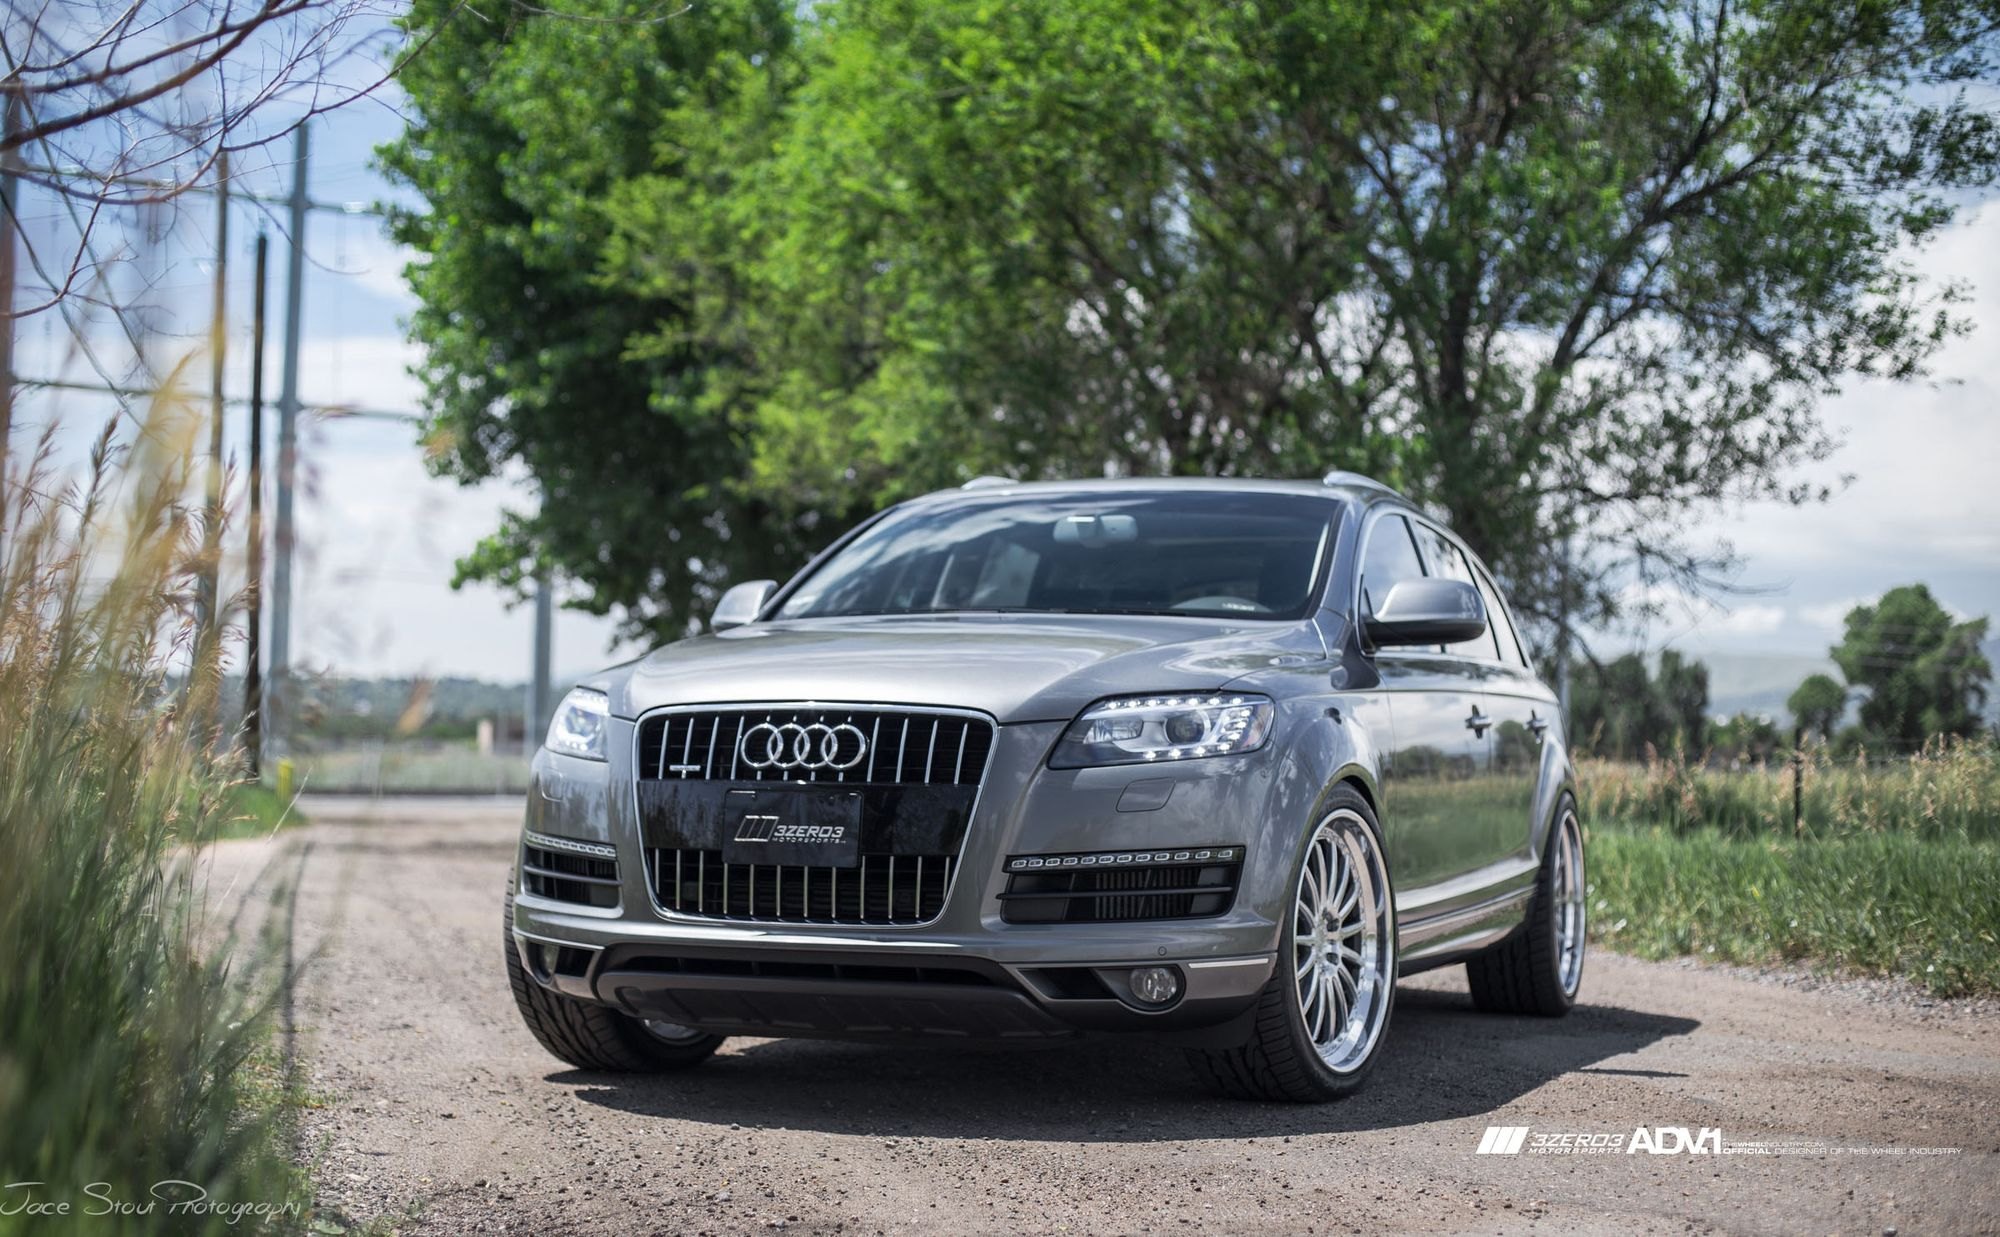 Gray Audi Q7 with LED Headlights - Photo by ADV.1